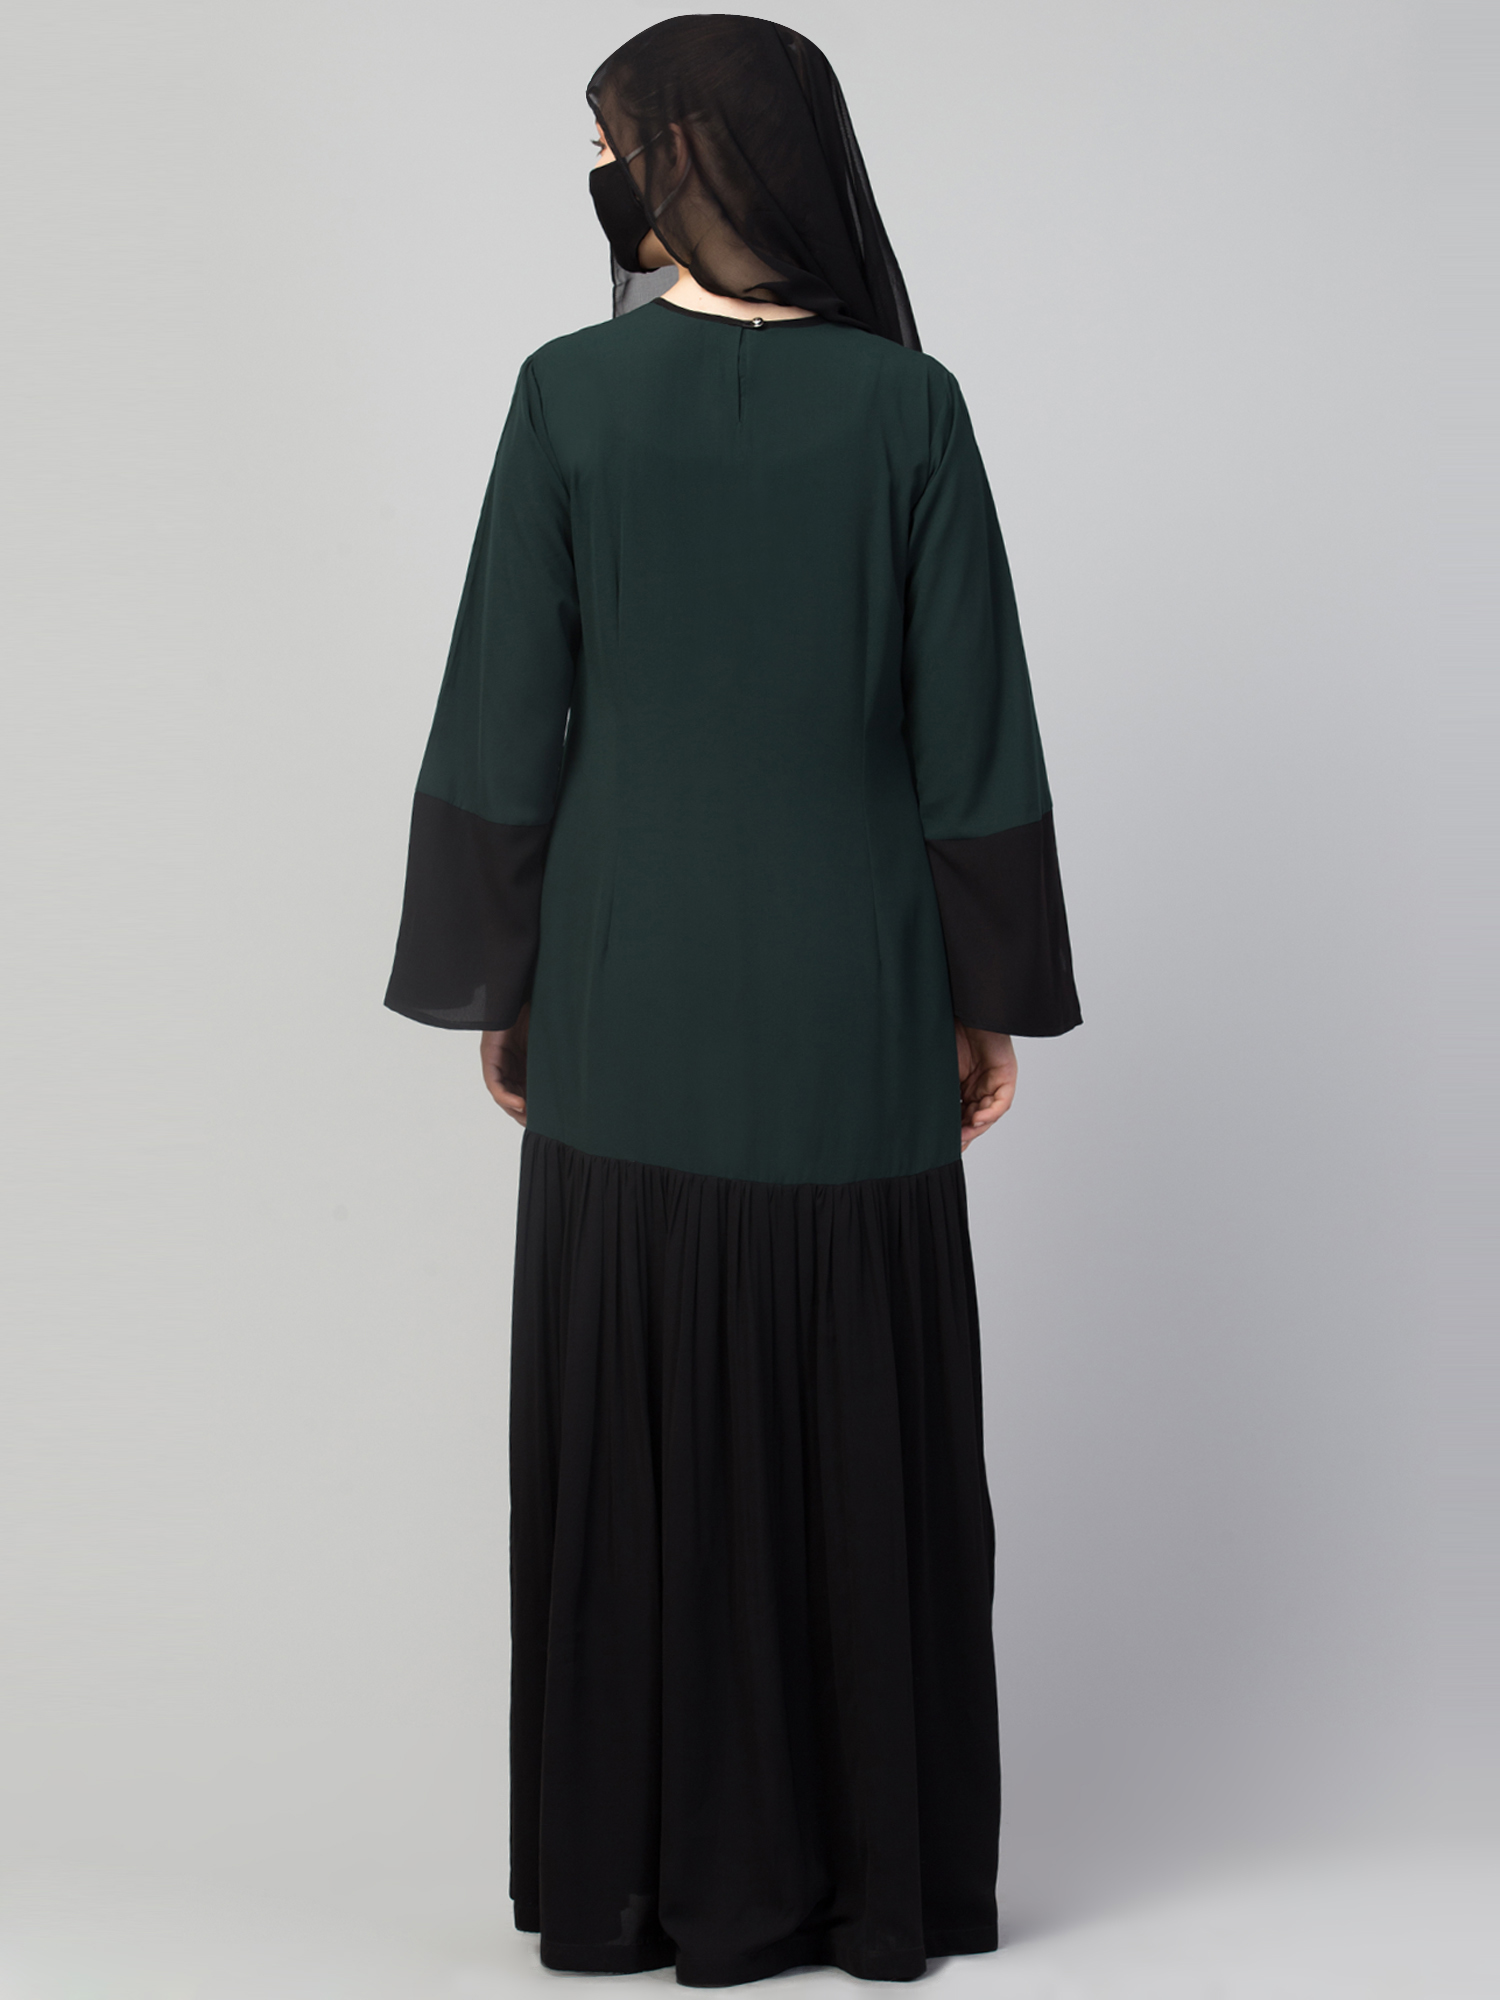 Stylish and Elegant Dual Color Abaya With Frills in Black and Green ...